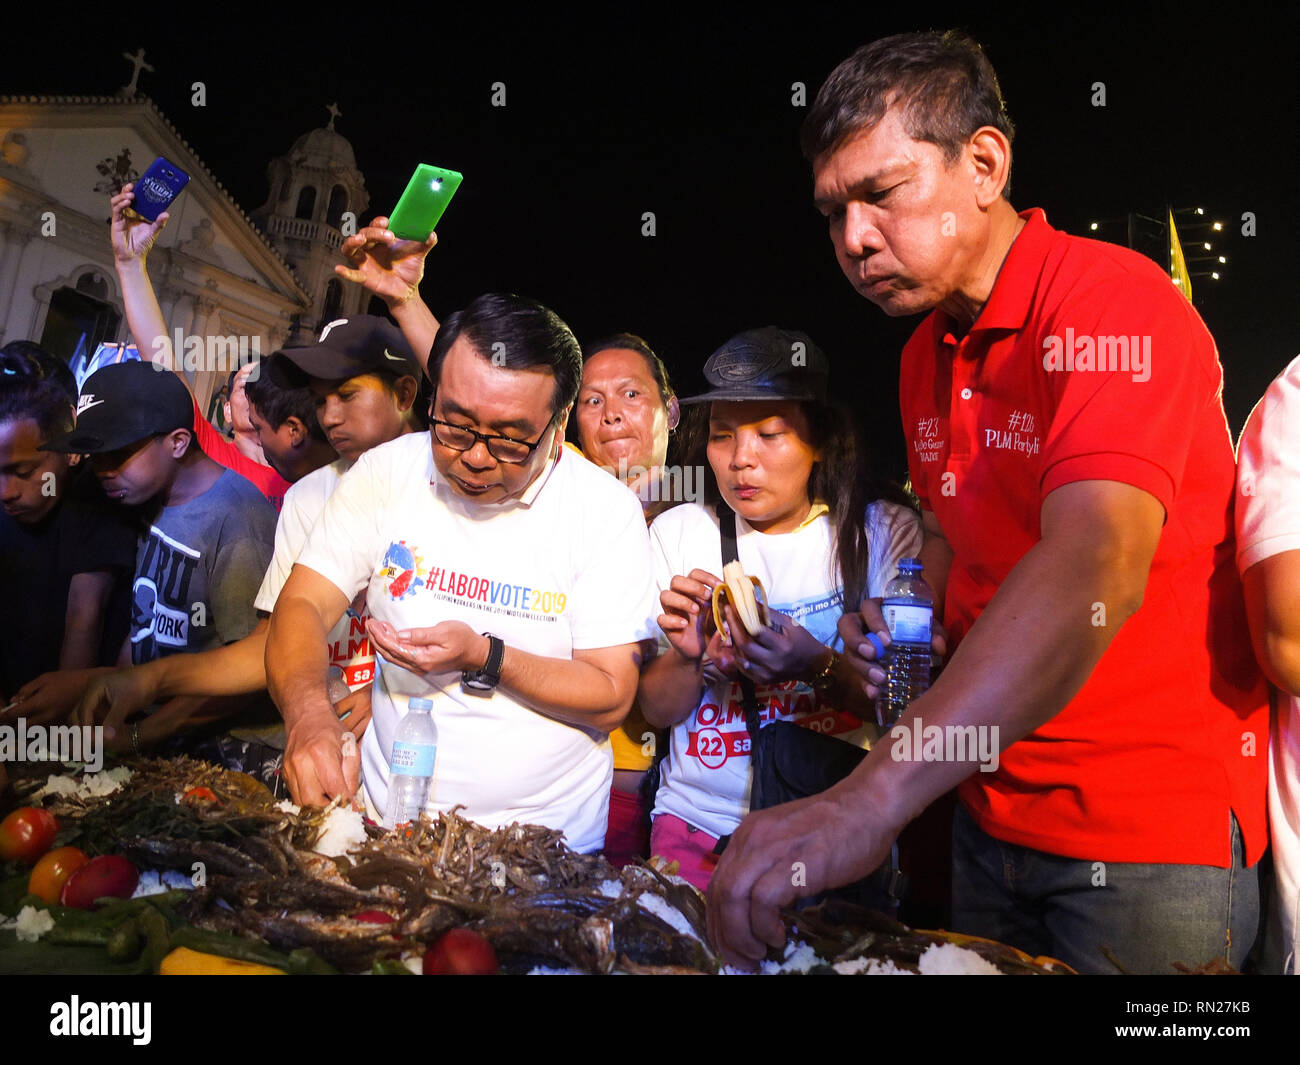 Manila, Philippines. 6th May, 2012. Former representative Neri Colmenares (L) and labor leader Leody de Guzman (R) participates in the boodle fight.''Labor Win'' a coalition of labor leaders running for Senate, said they are the only ones who have the ''real'' credentials to push for pro-poor policies unlike other candidates for this year elections.the policial party ''Partido ng Lakas ng Masa'' offers themselves as alternatives in this year's elections. They say they don't belong to either the administration or opposition Credit: Josefiel Rivera/SOPA Images/ZUMA Wire/Alamy Live News Stock Photo